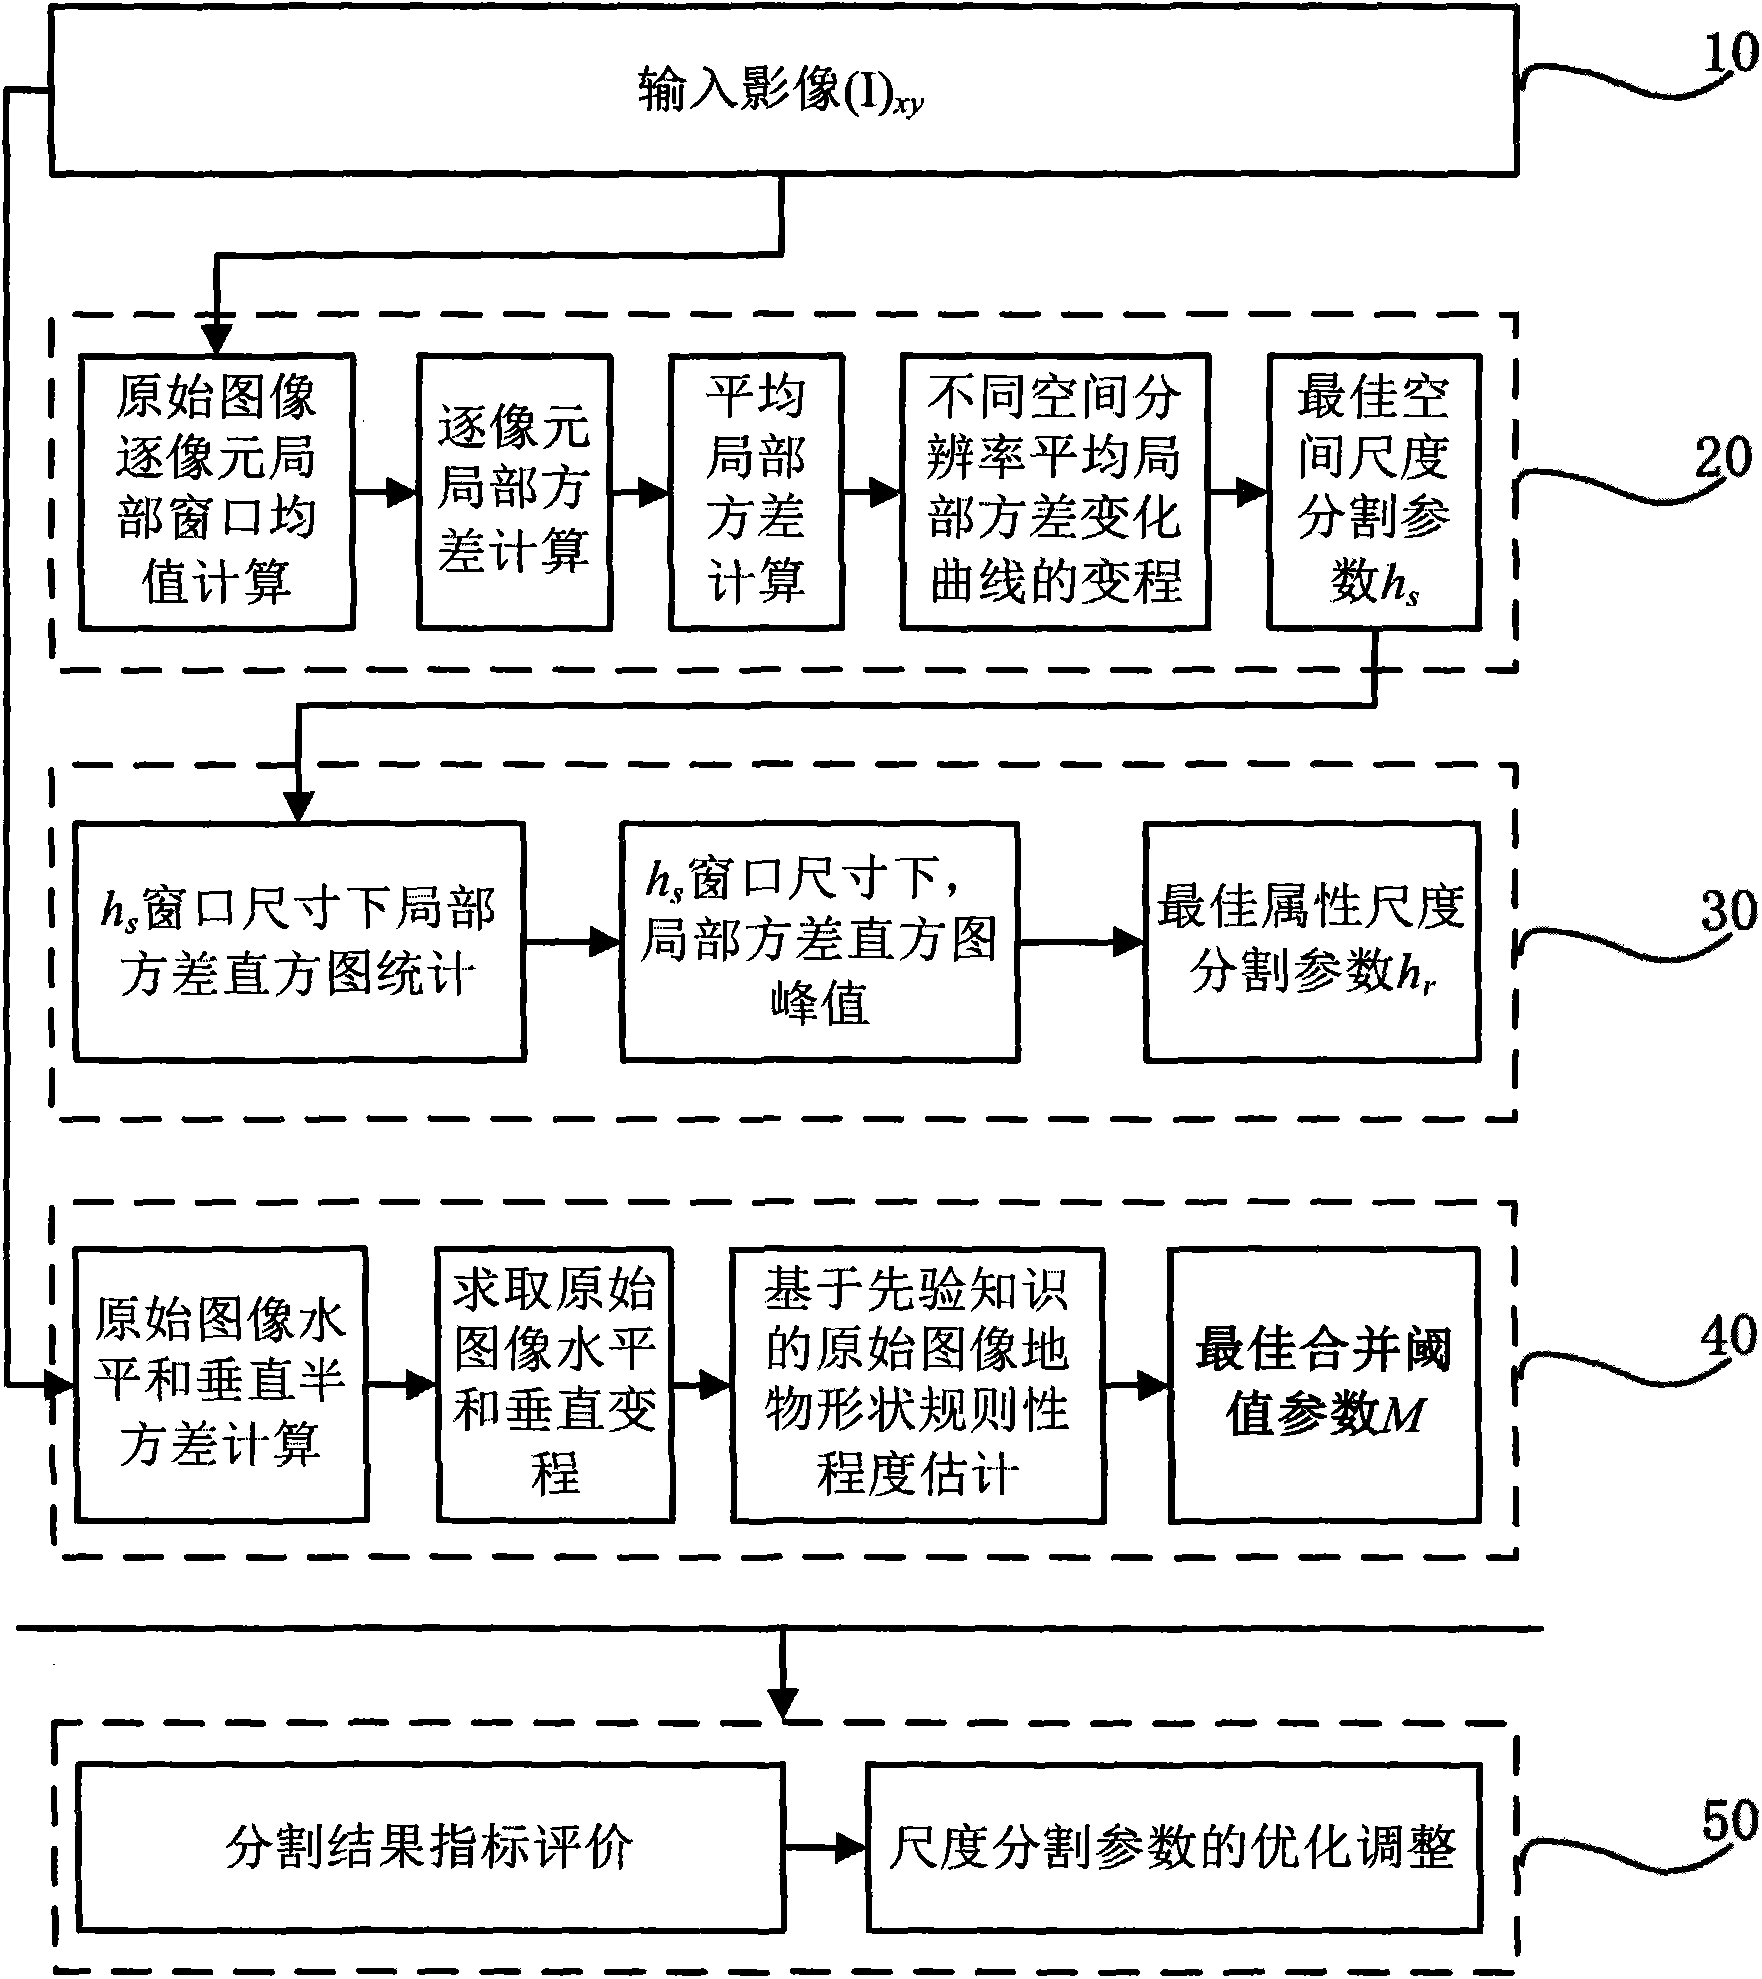 Automatic scale segmentation parameter selection method for object remote sensing image analysis